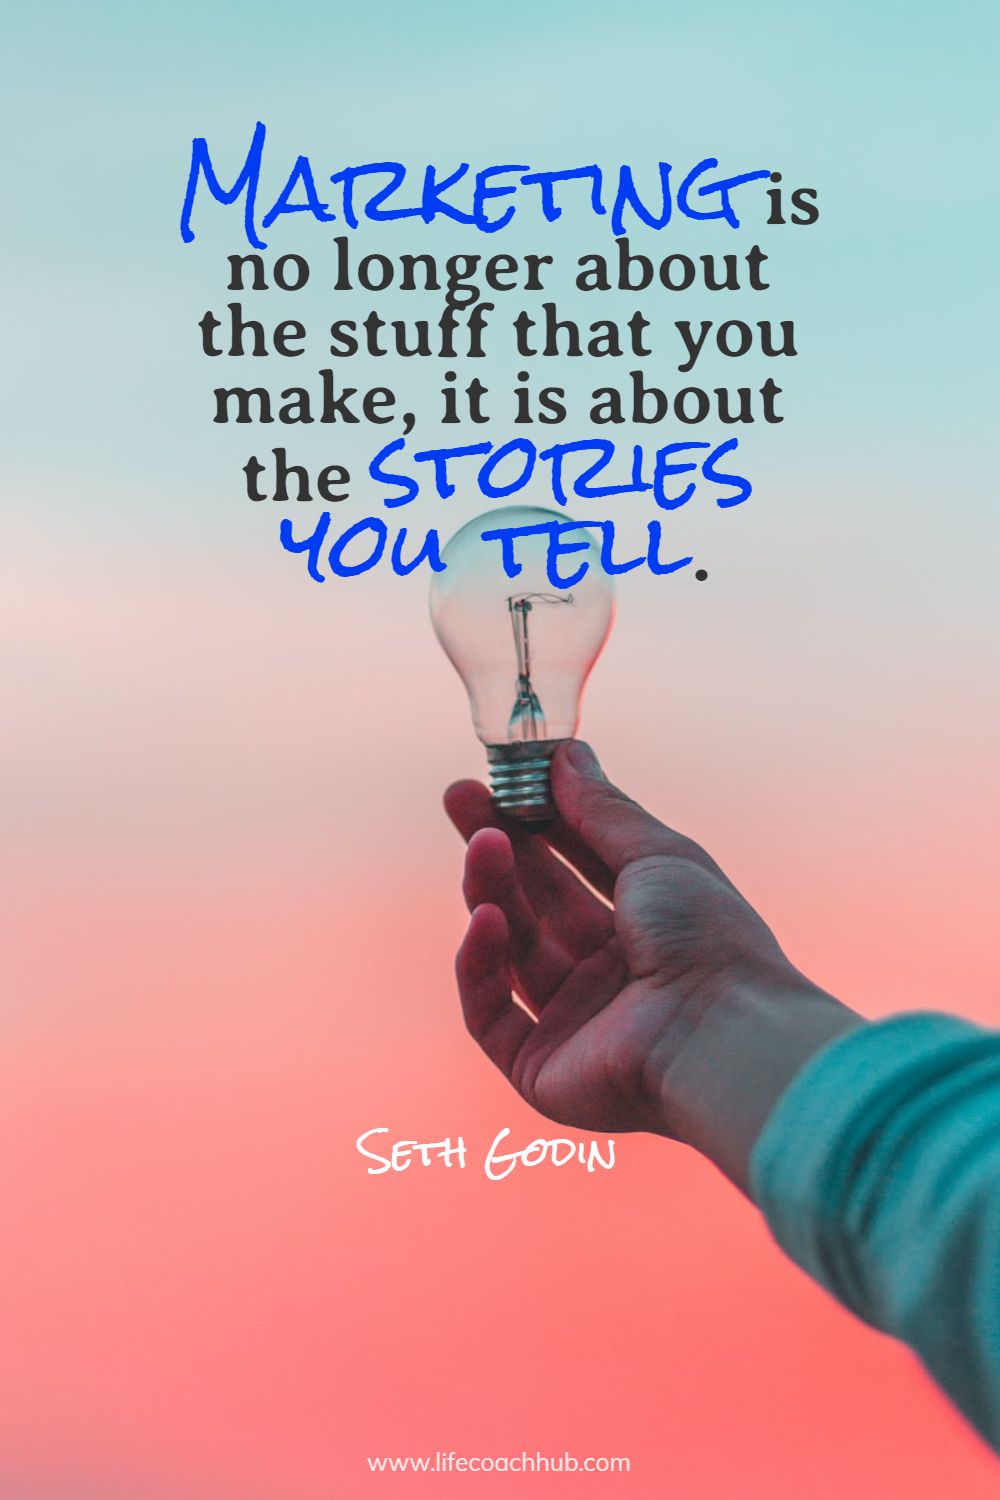 Marketing is no longer about the stuff that you make, it is about the stories you tell. Seth Godin Coaching Quote